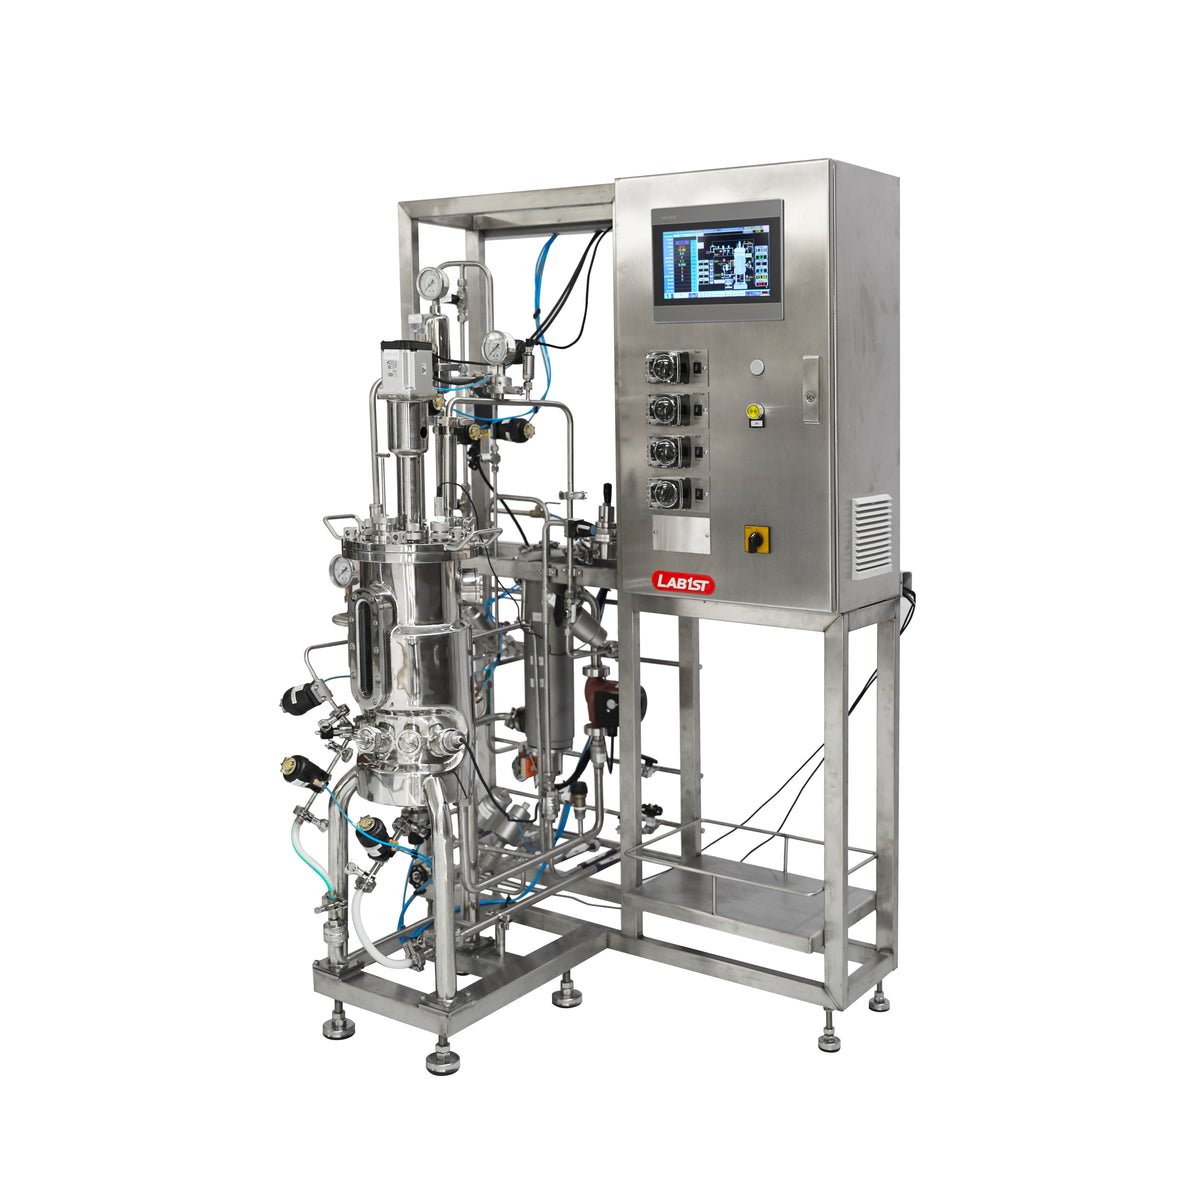 200L Stainless Steel Bioreactor for Microbial Fermentation with 2 Gas Inlets BR500-M1